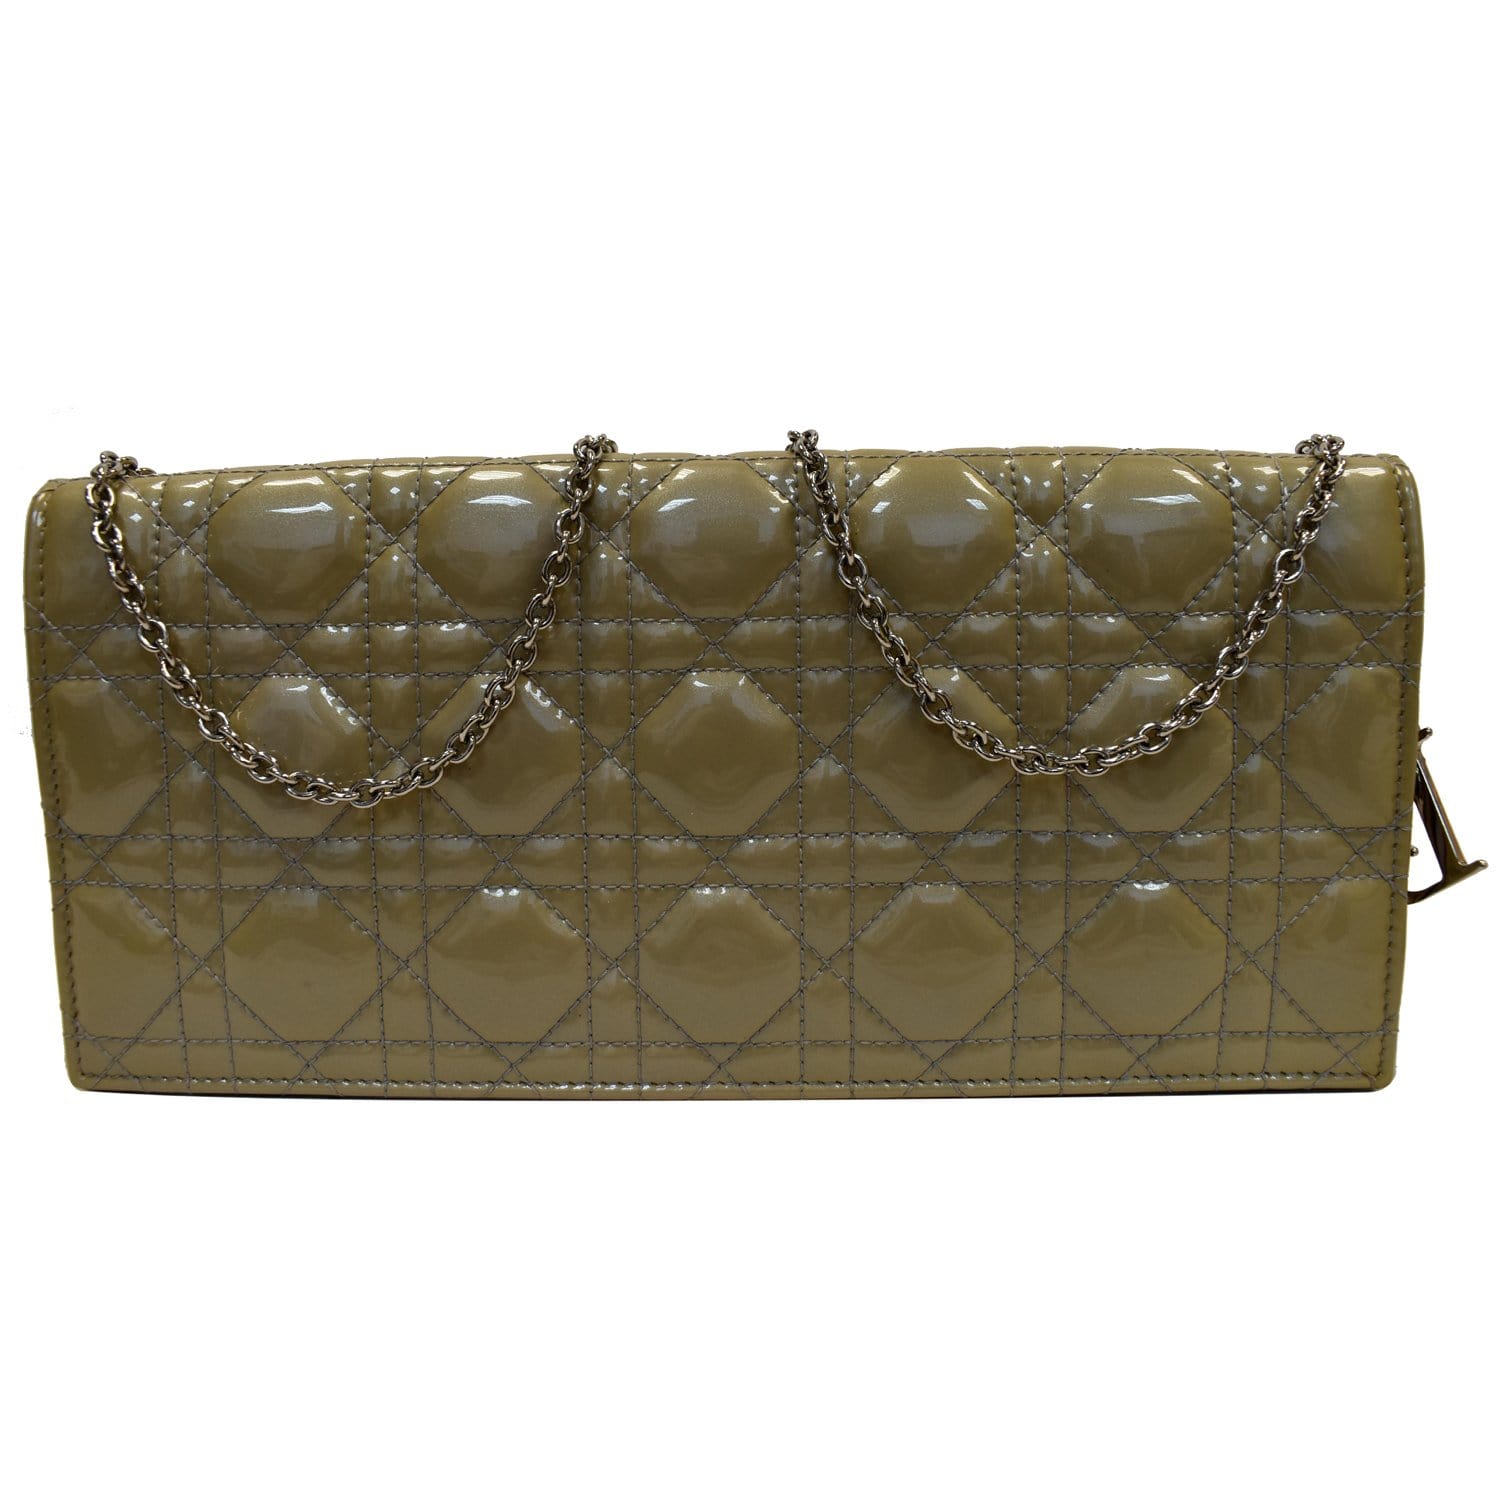 Christian Dior Quilted Patent Leather Lady Dior Clutch Bag